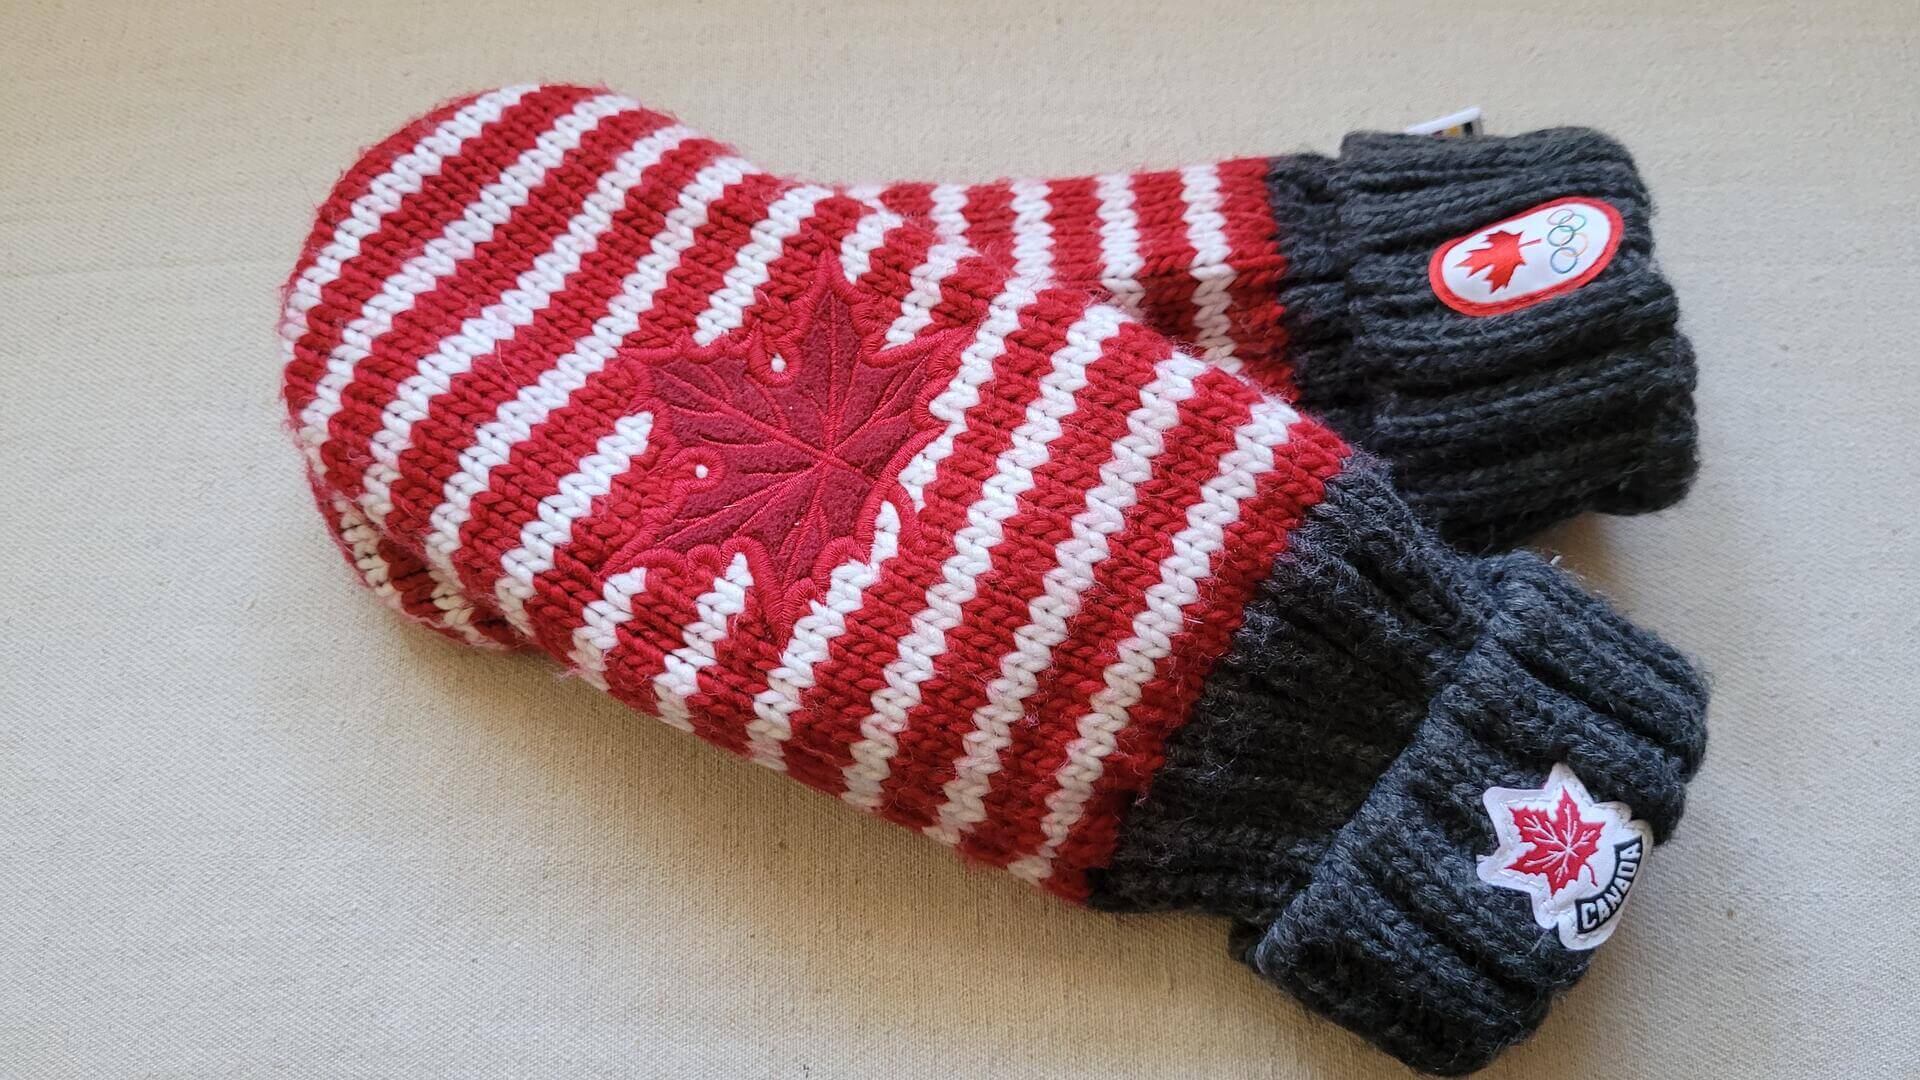 Beautiful wool mittens by The Canadian Olympic Foundation in partnership with the Hudson’s Bay Company made for Vancouver Olympics in 2010. Vintage collectible sports memorabilia and Canadiana